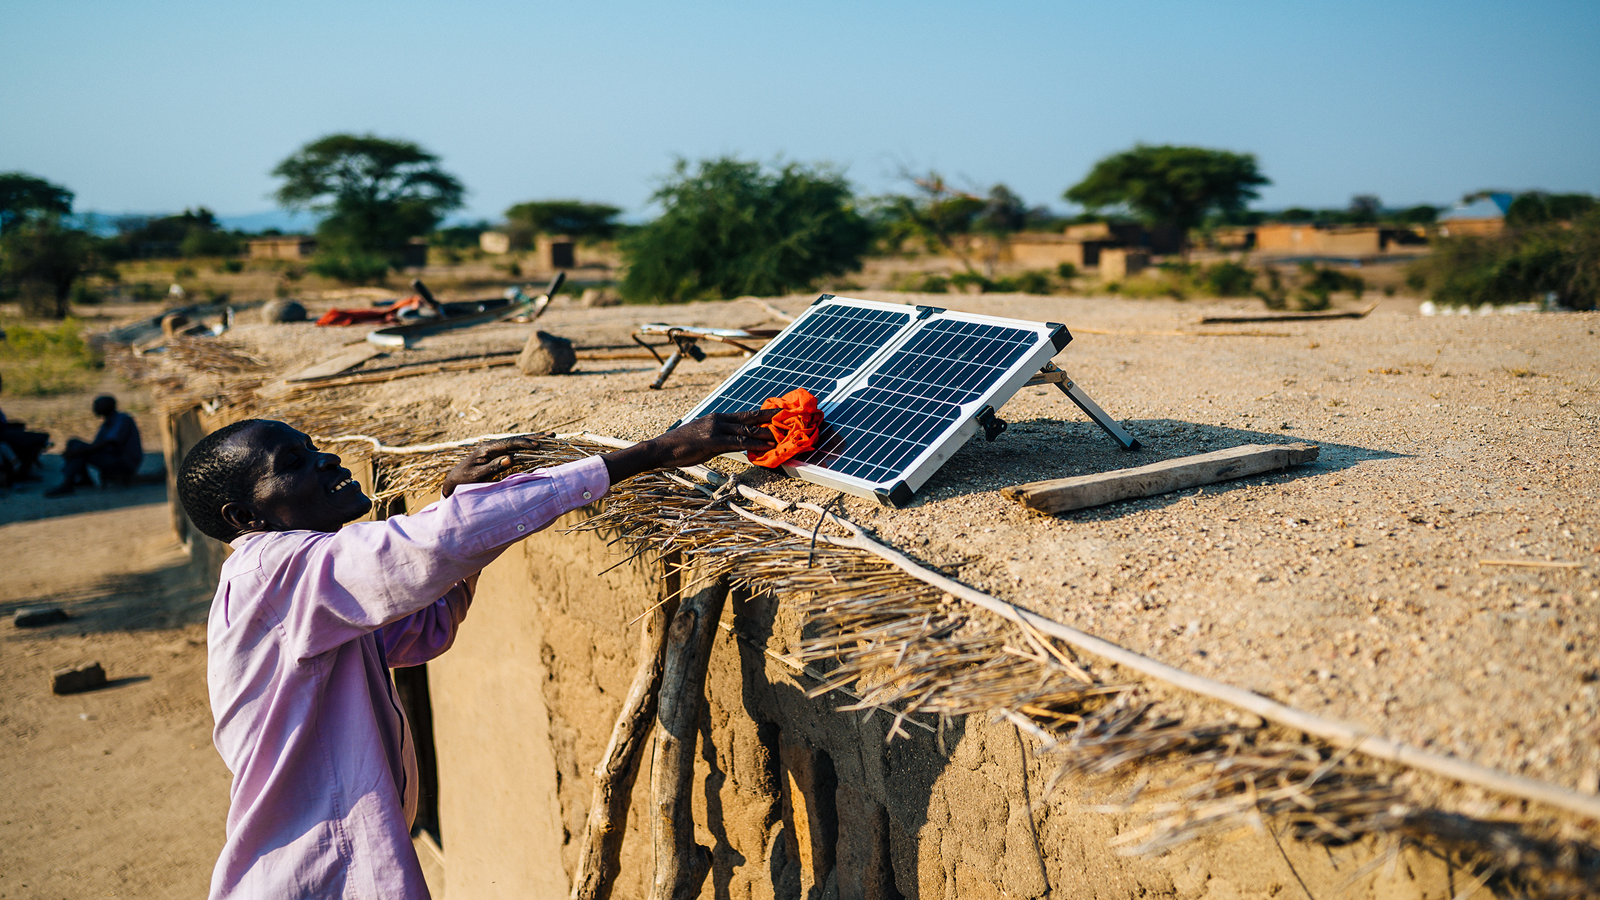 Lameck Chibago (59) proudly cleans, maintains and positions the solar panel on the roof of his house.